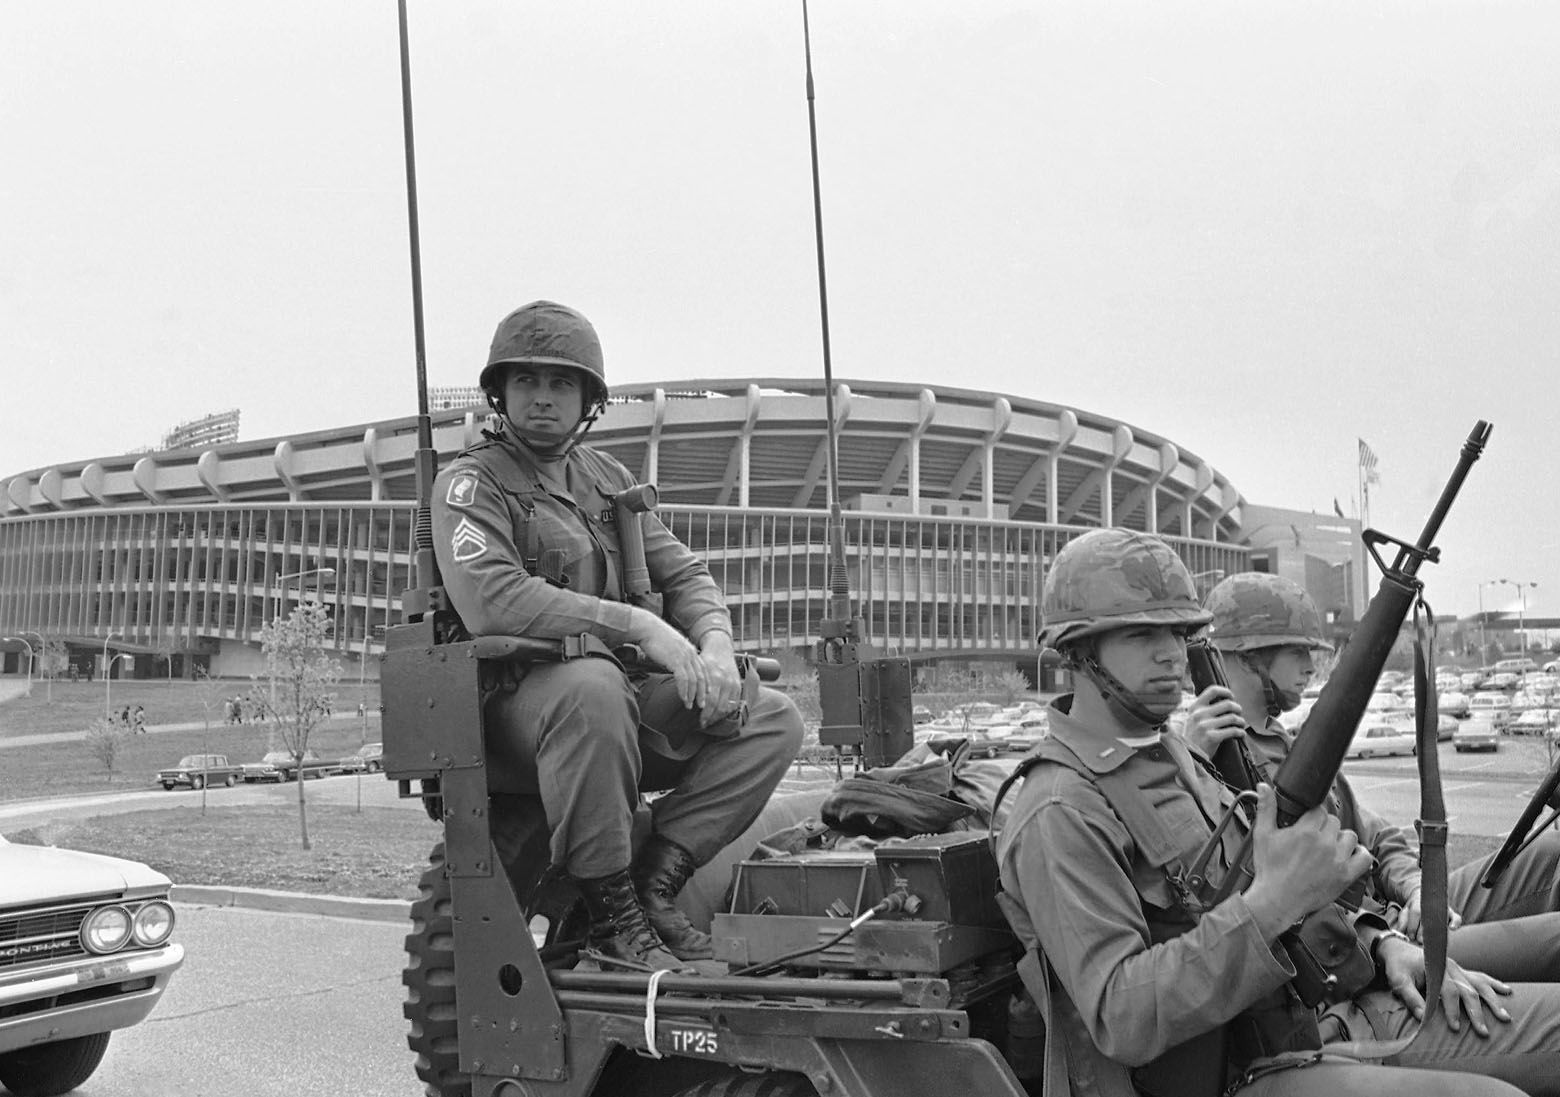 Several hundred of the Federal troops on duty in wake of violence in Washington area on April 11, 1968, watched the Minnesota Twins defeat the Washington Senators 5-4. (AP Photo/Harvey Georges)